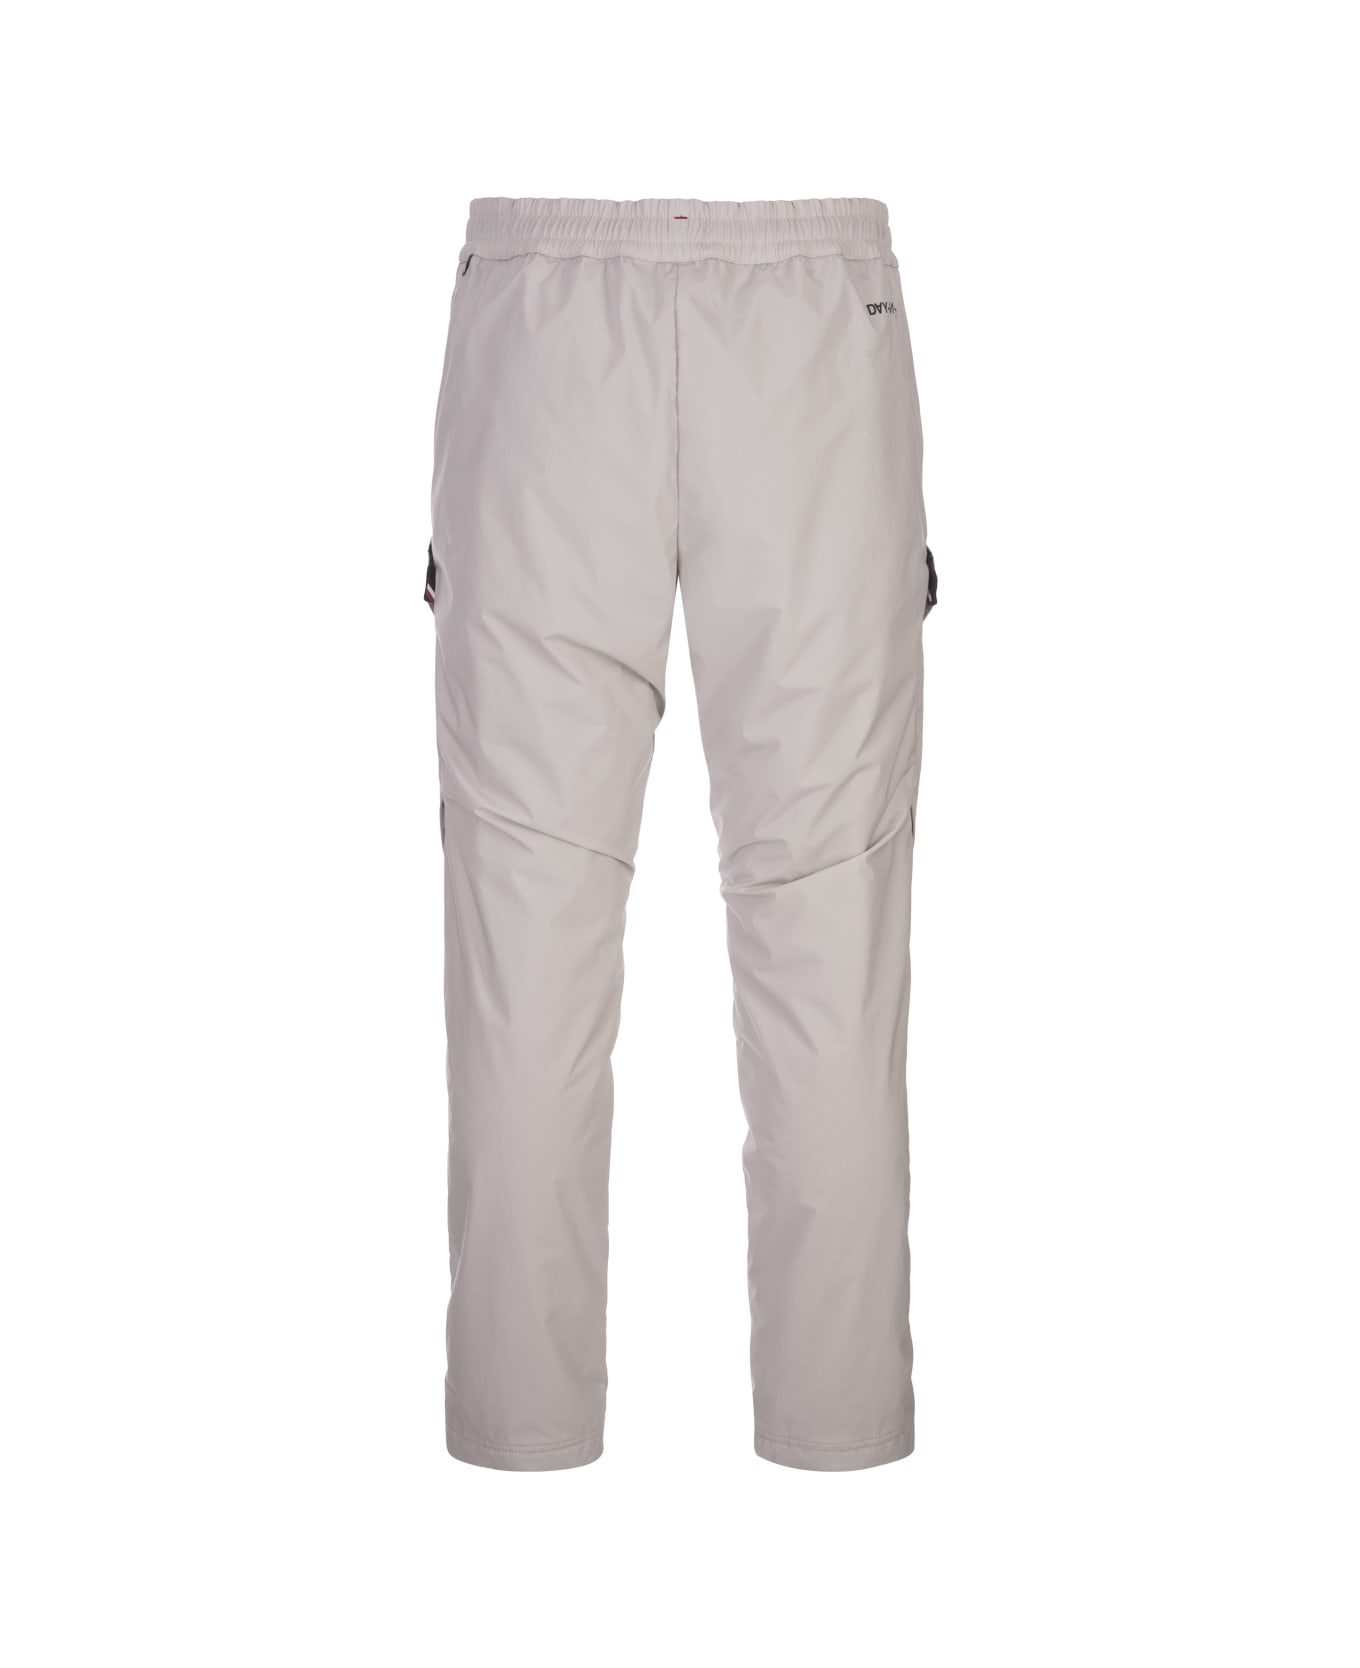 Moncler Grenoble Ivory White Ripstop Trousers - Grey